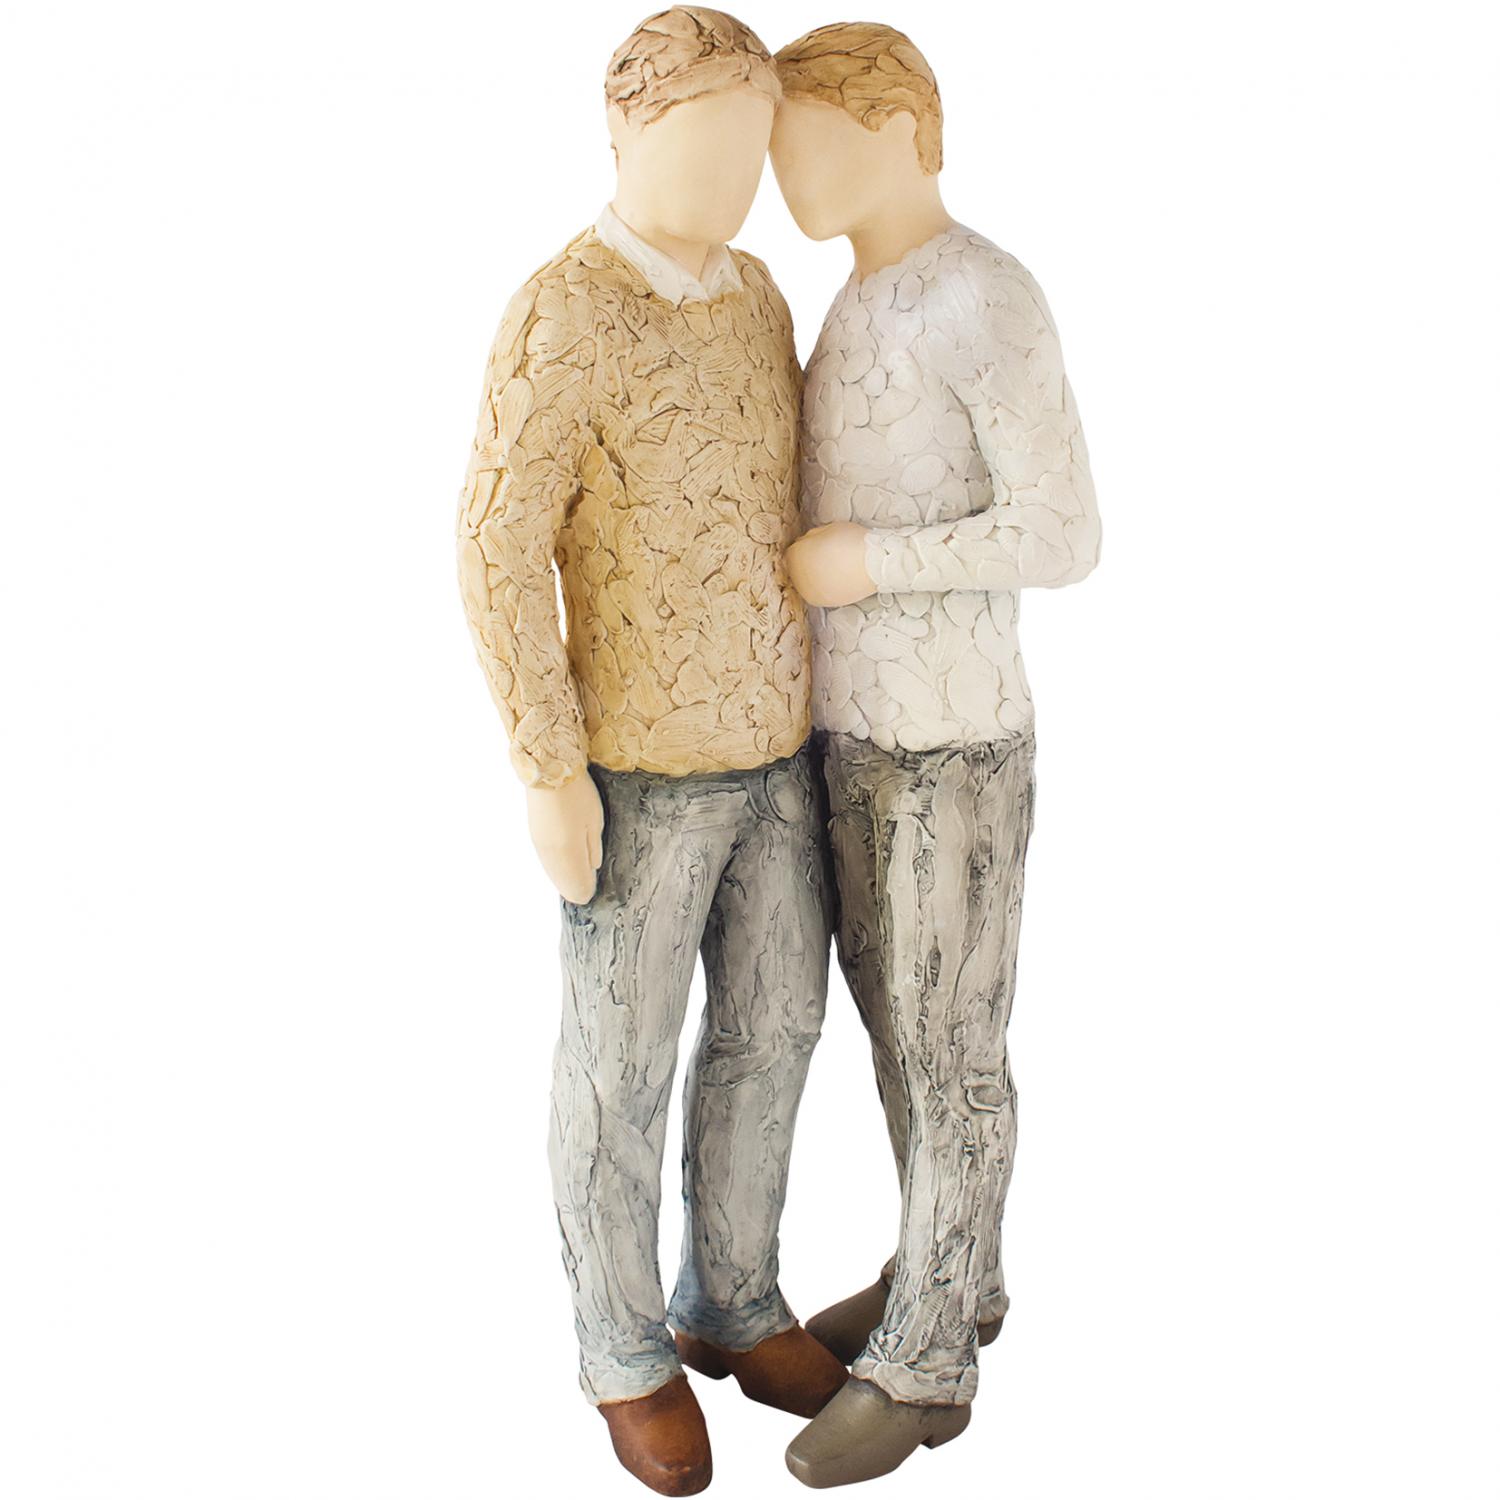 Thumbnail for 9611MTW Devoted Figurine More Than Words Gift Boxed 27cmH True partners in love and life Gifted Boxed. Designed and created in the UK